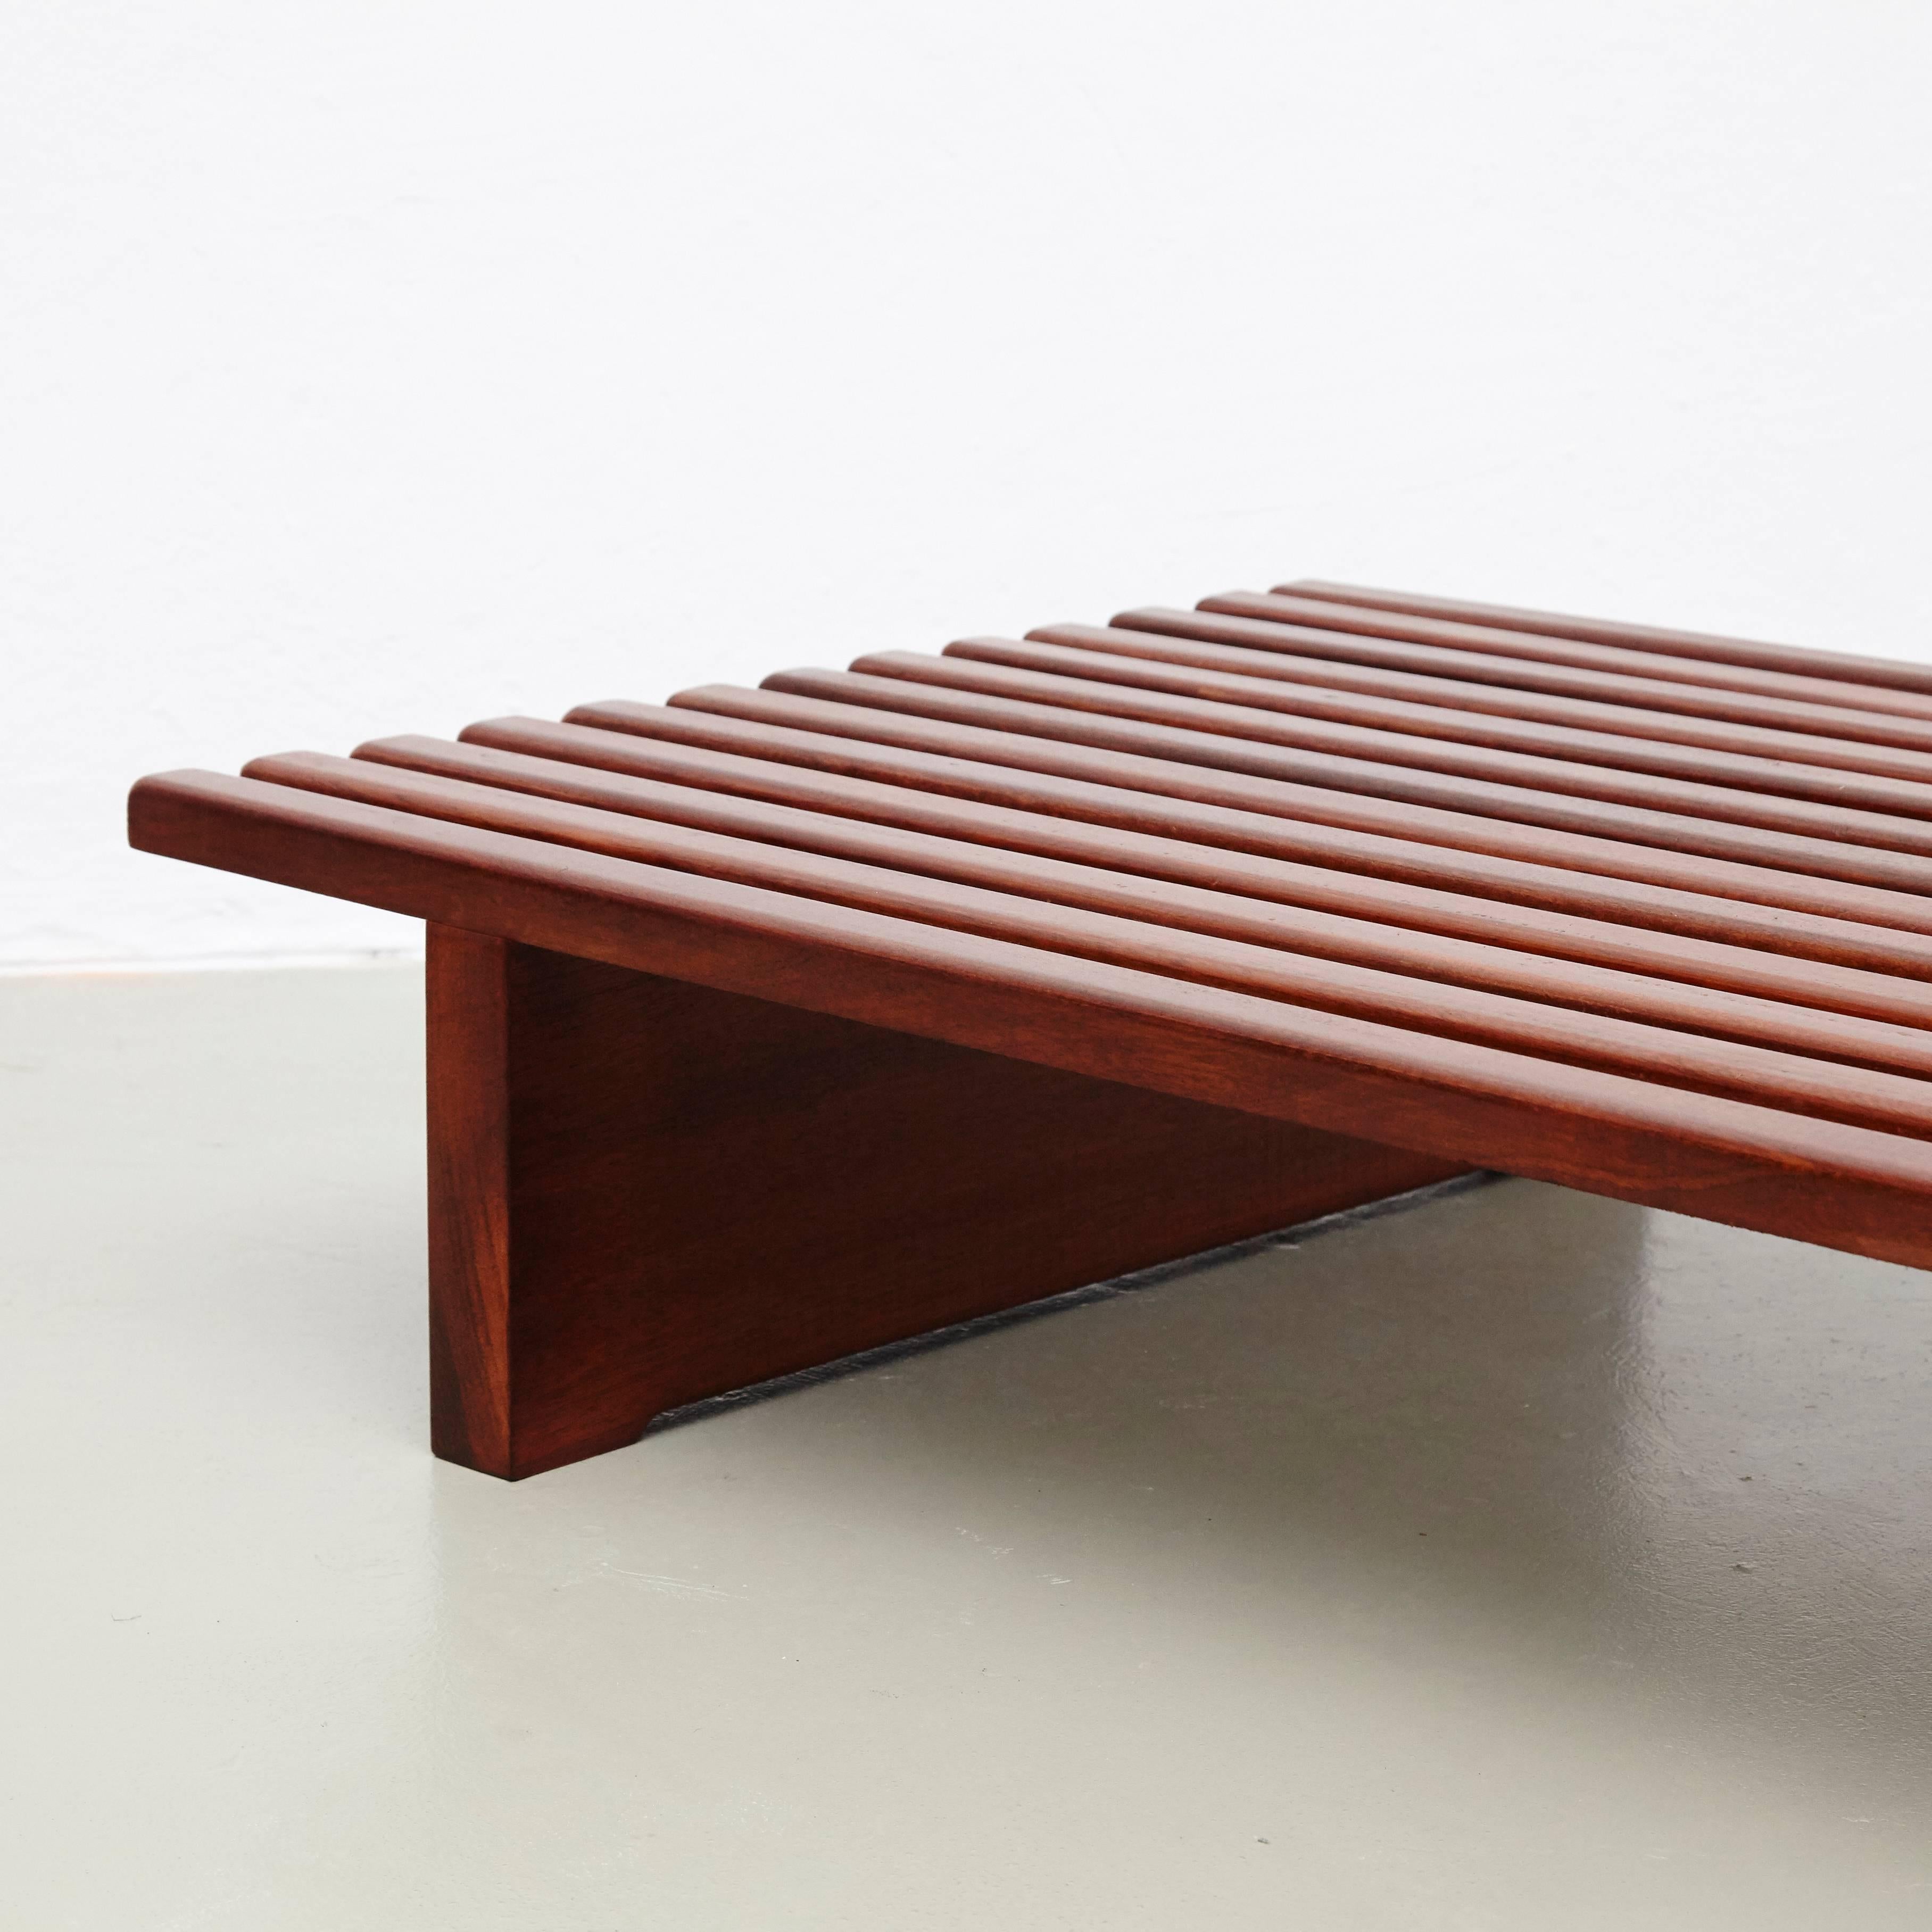 Bench designed by Charlotte Perriand, circa 1950.
This model is with 13 slats of wood.

Mahogany wood base and structure.

Wooden legs seems to be latter added by previous owner.

Provenance: Cansado, Mauritania (Africa).

In good original